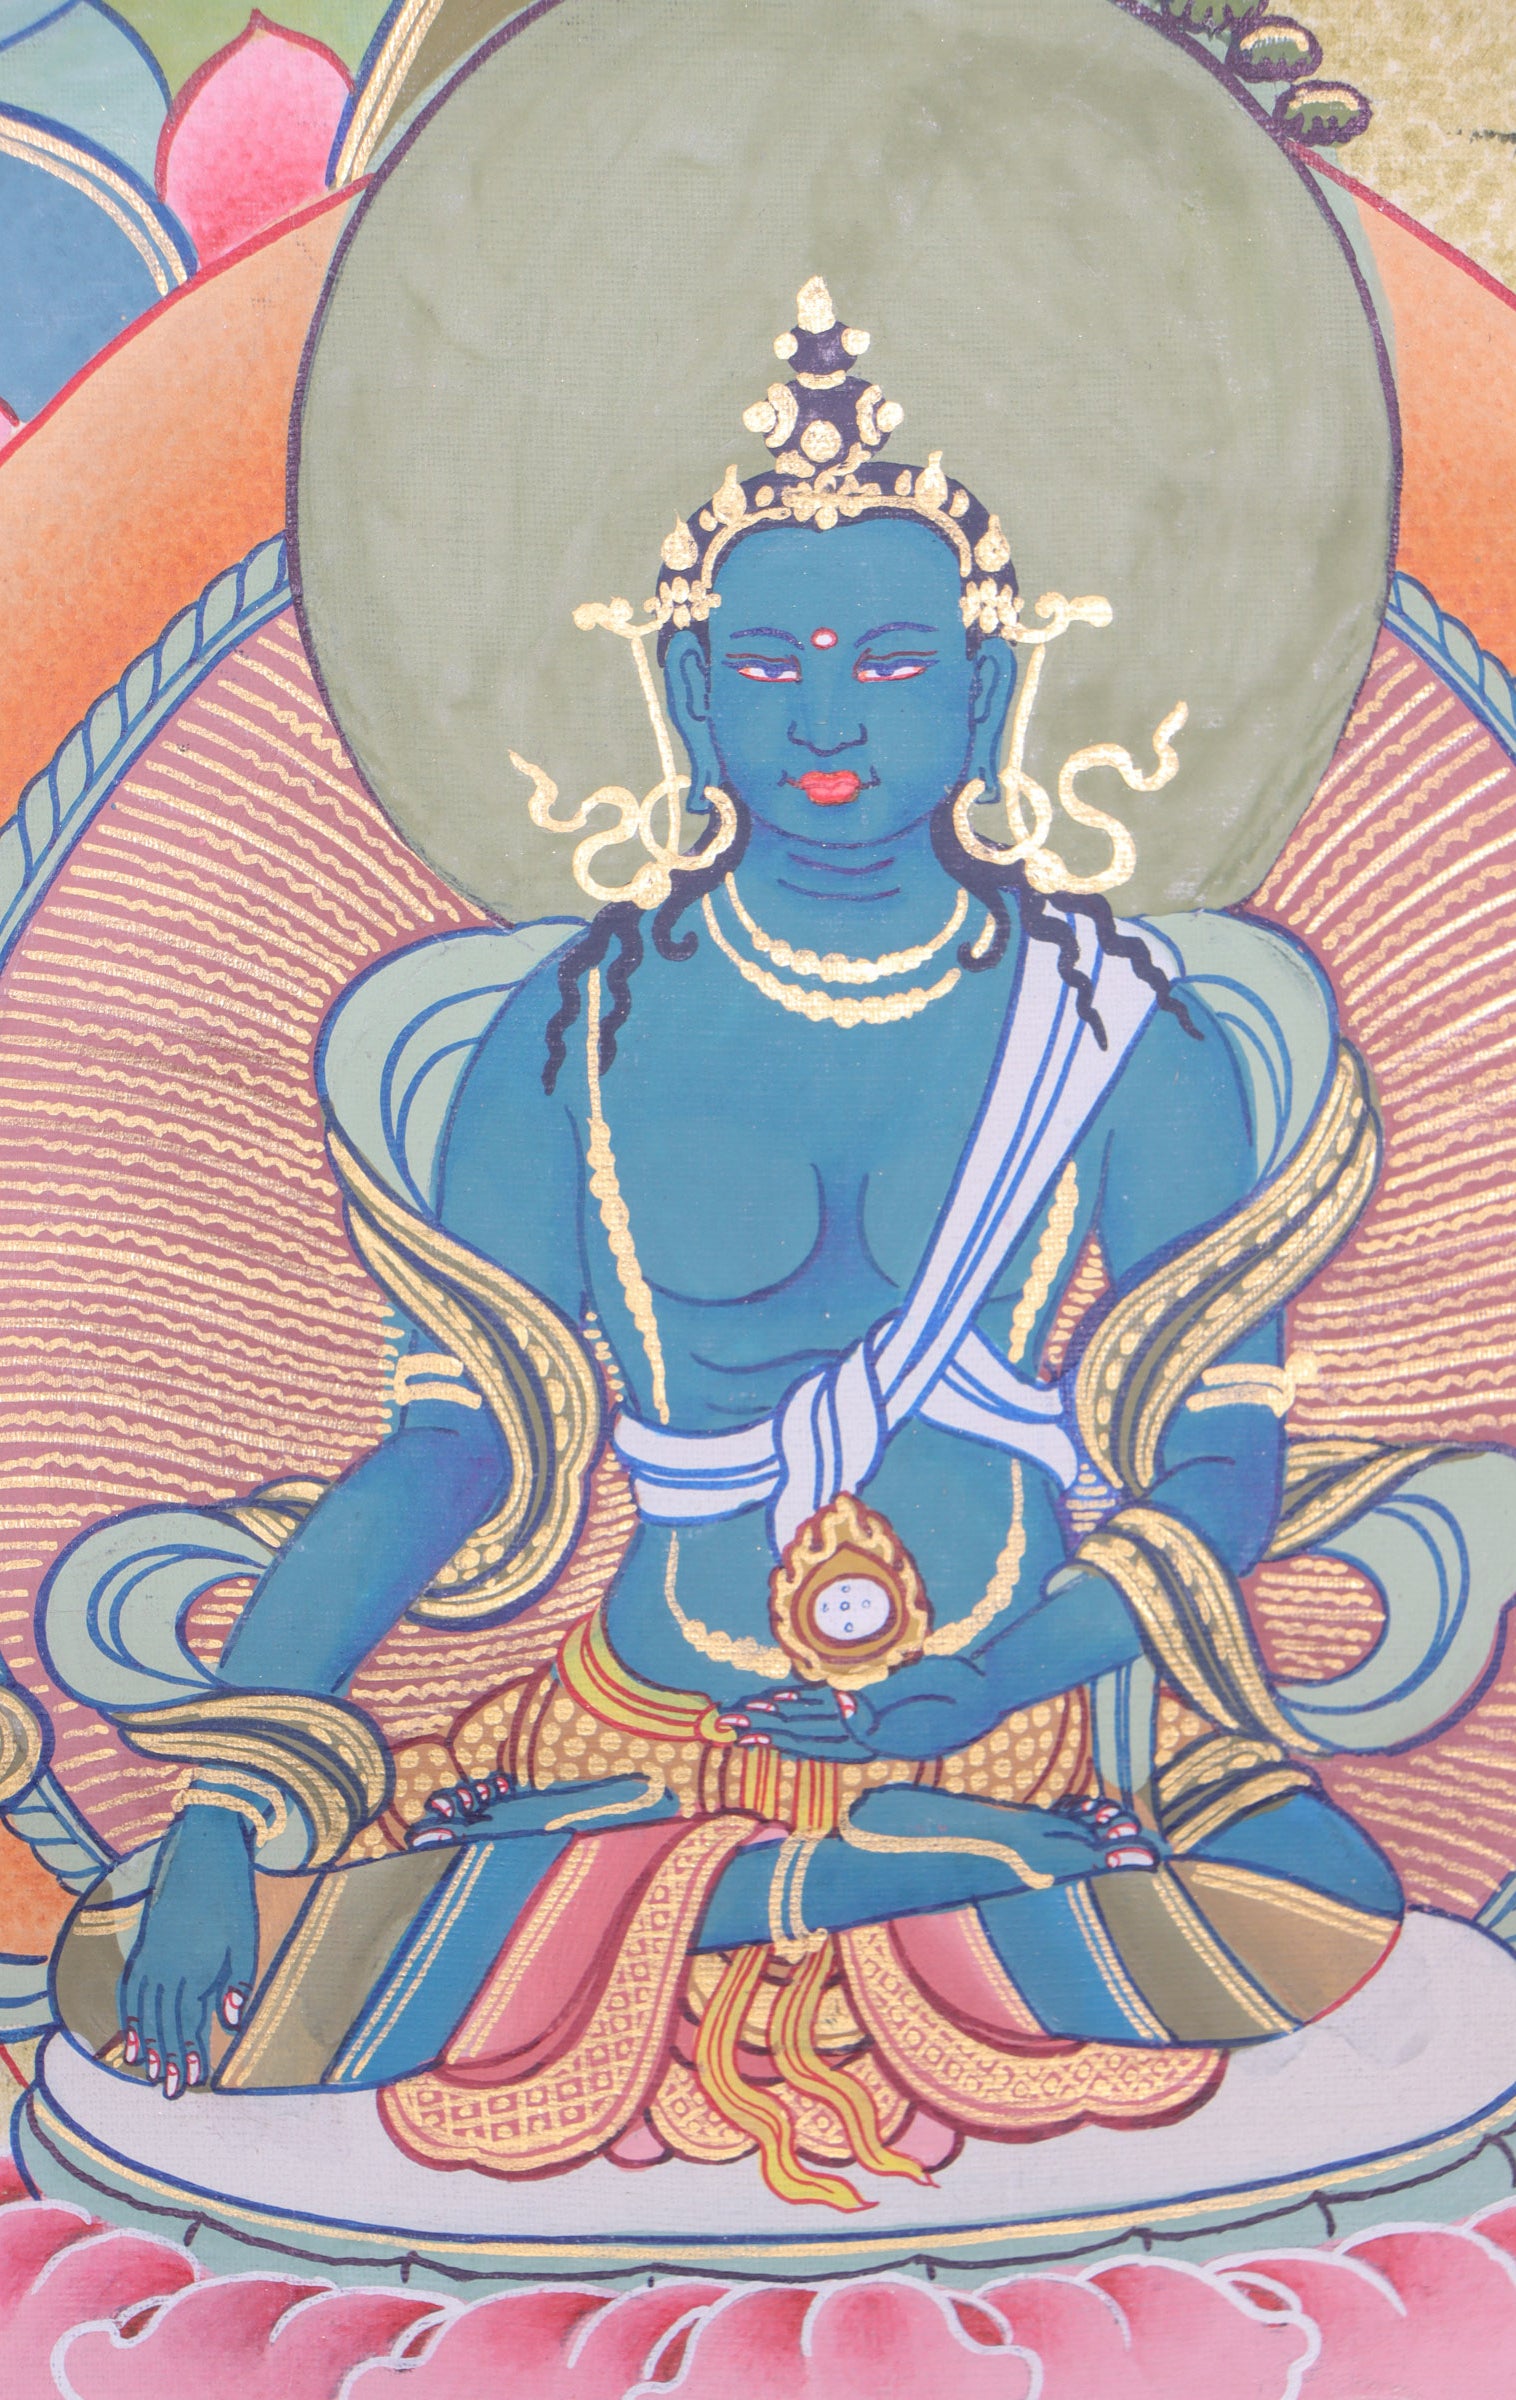 Amitayus Thangka Painting for devotion, meditation and blessings.